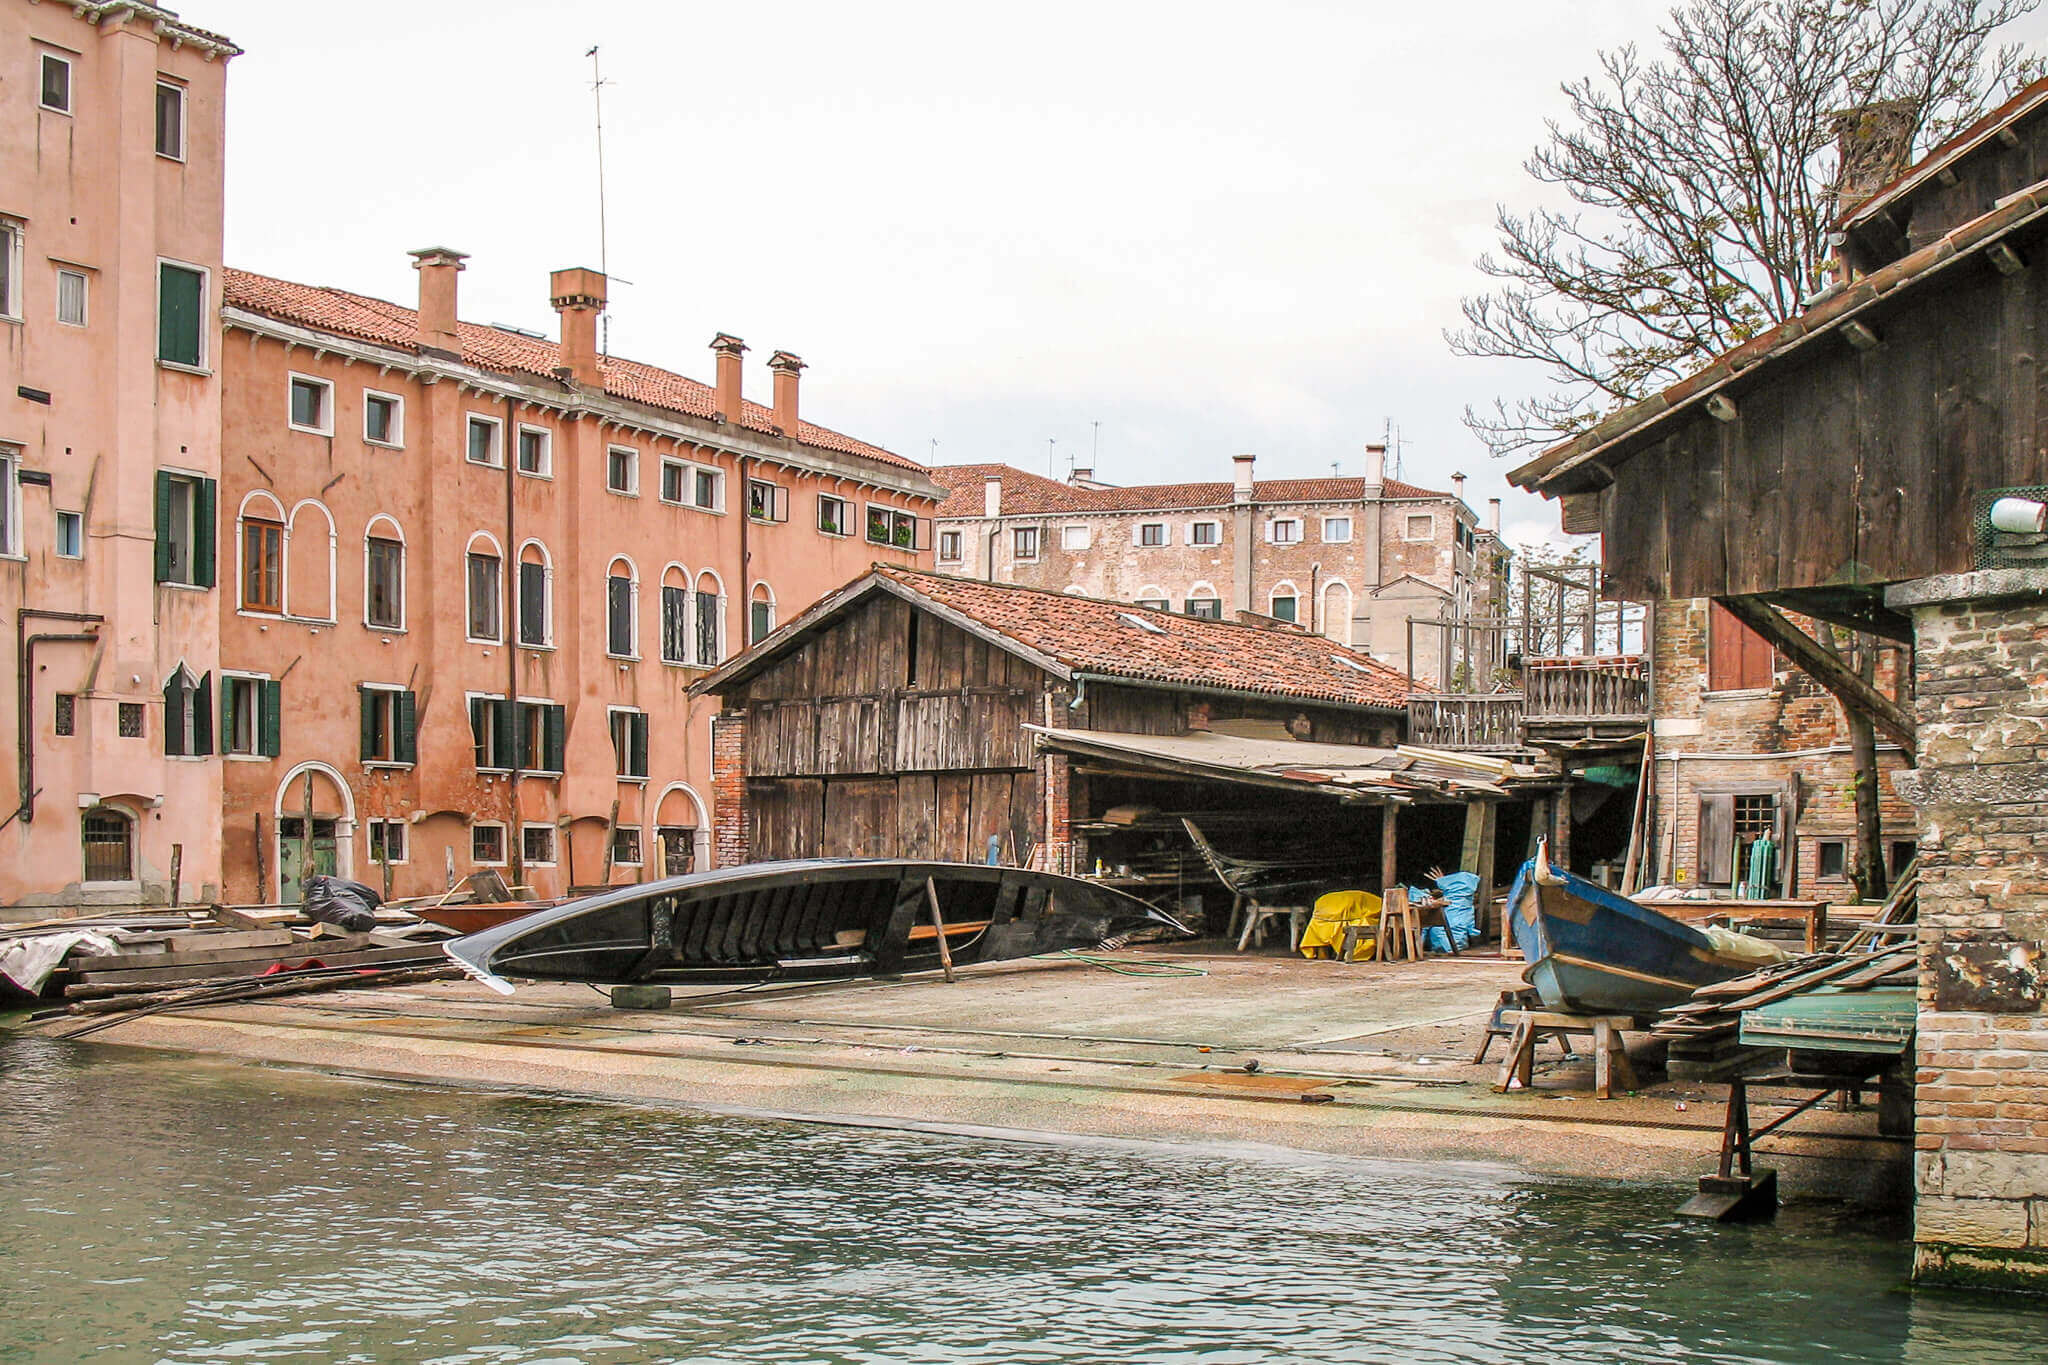 A gondola being repaired in Venice